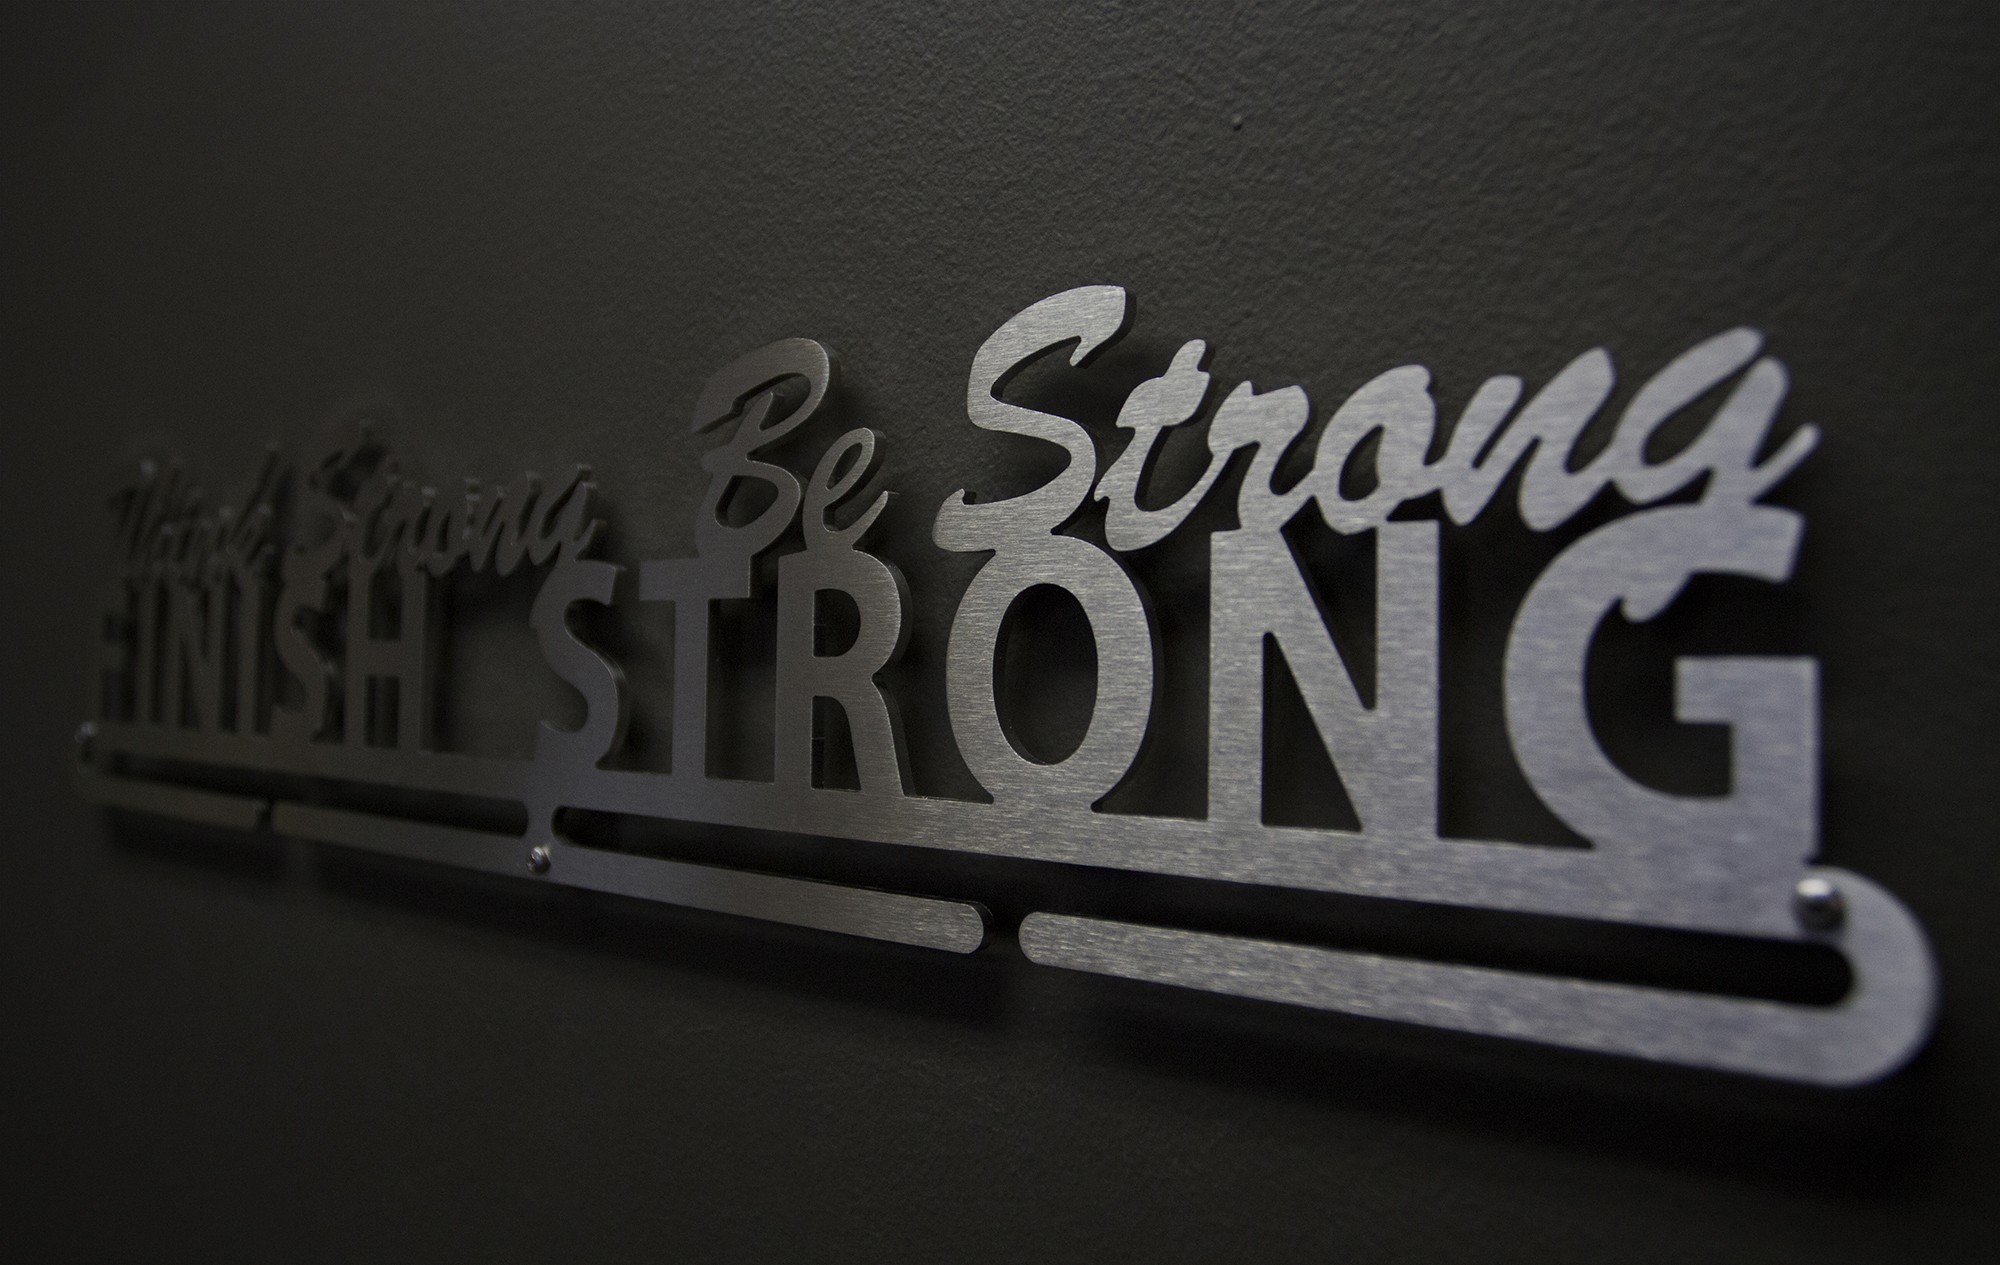 Think Strong, Be Strong, Finish Strong